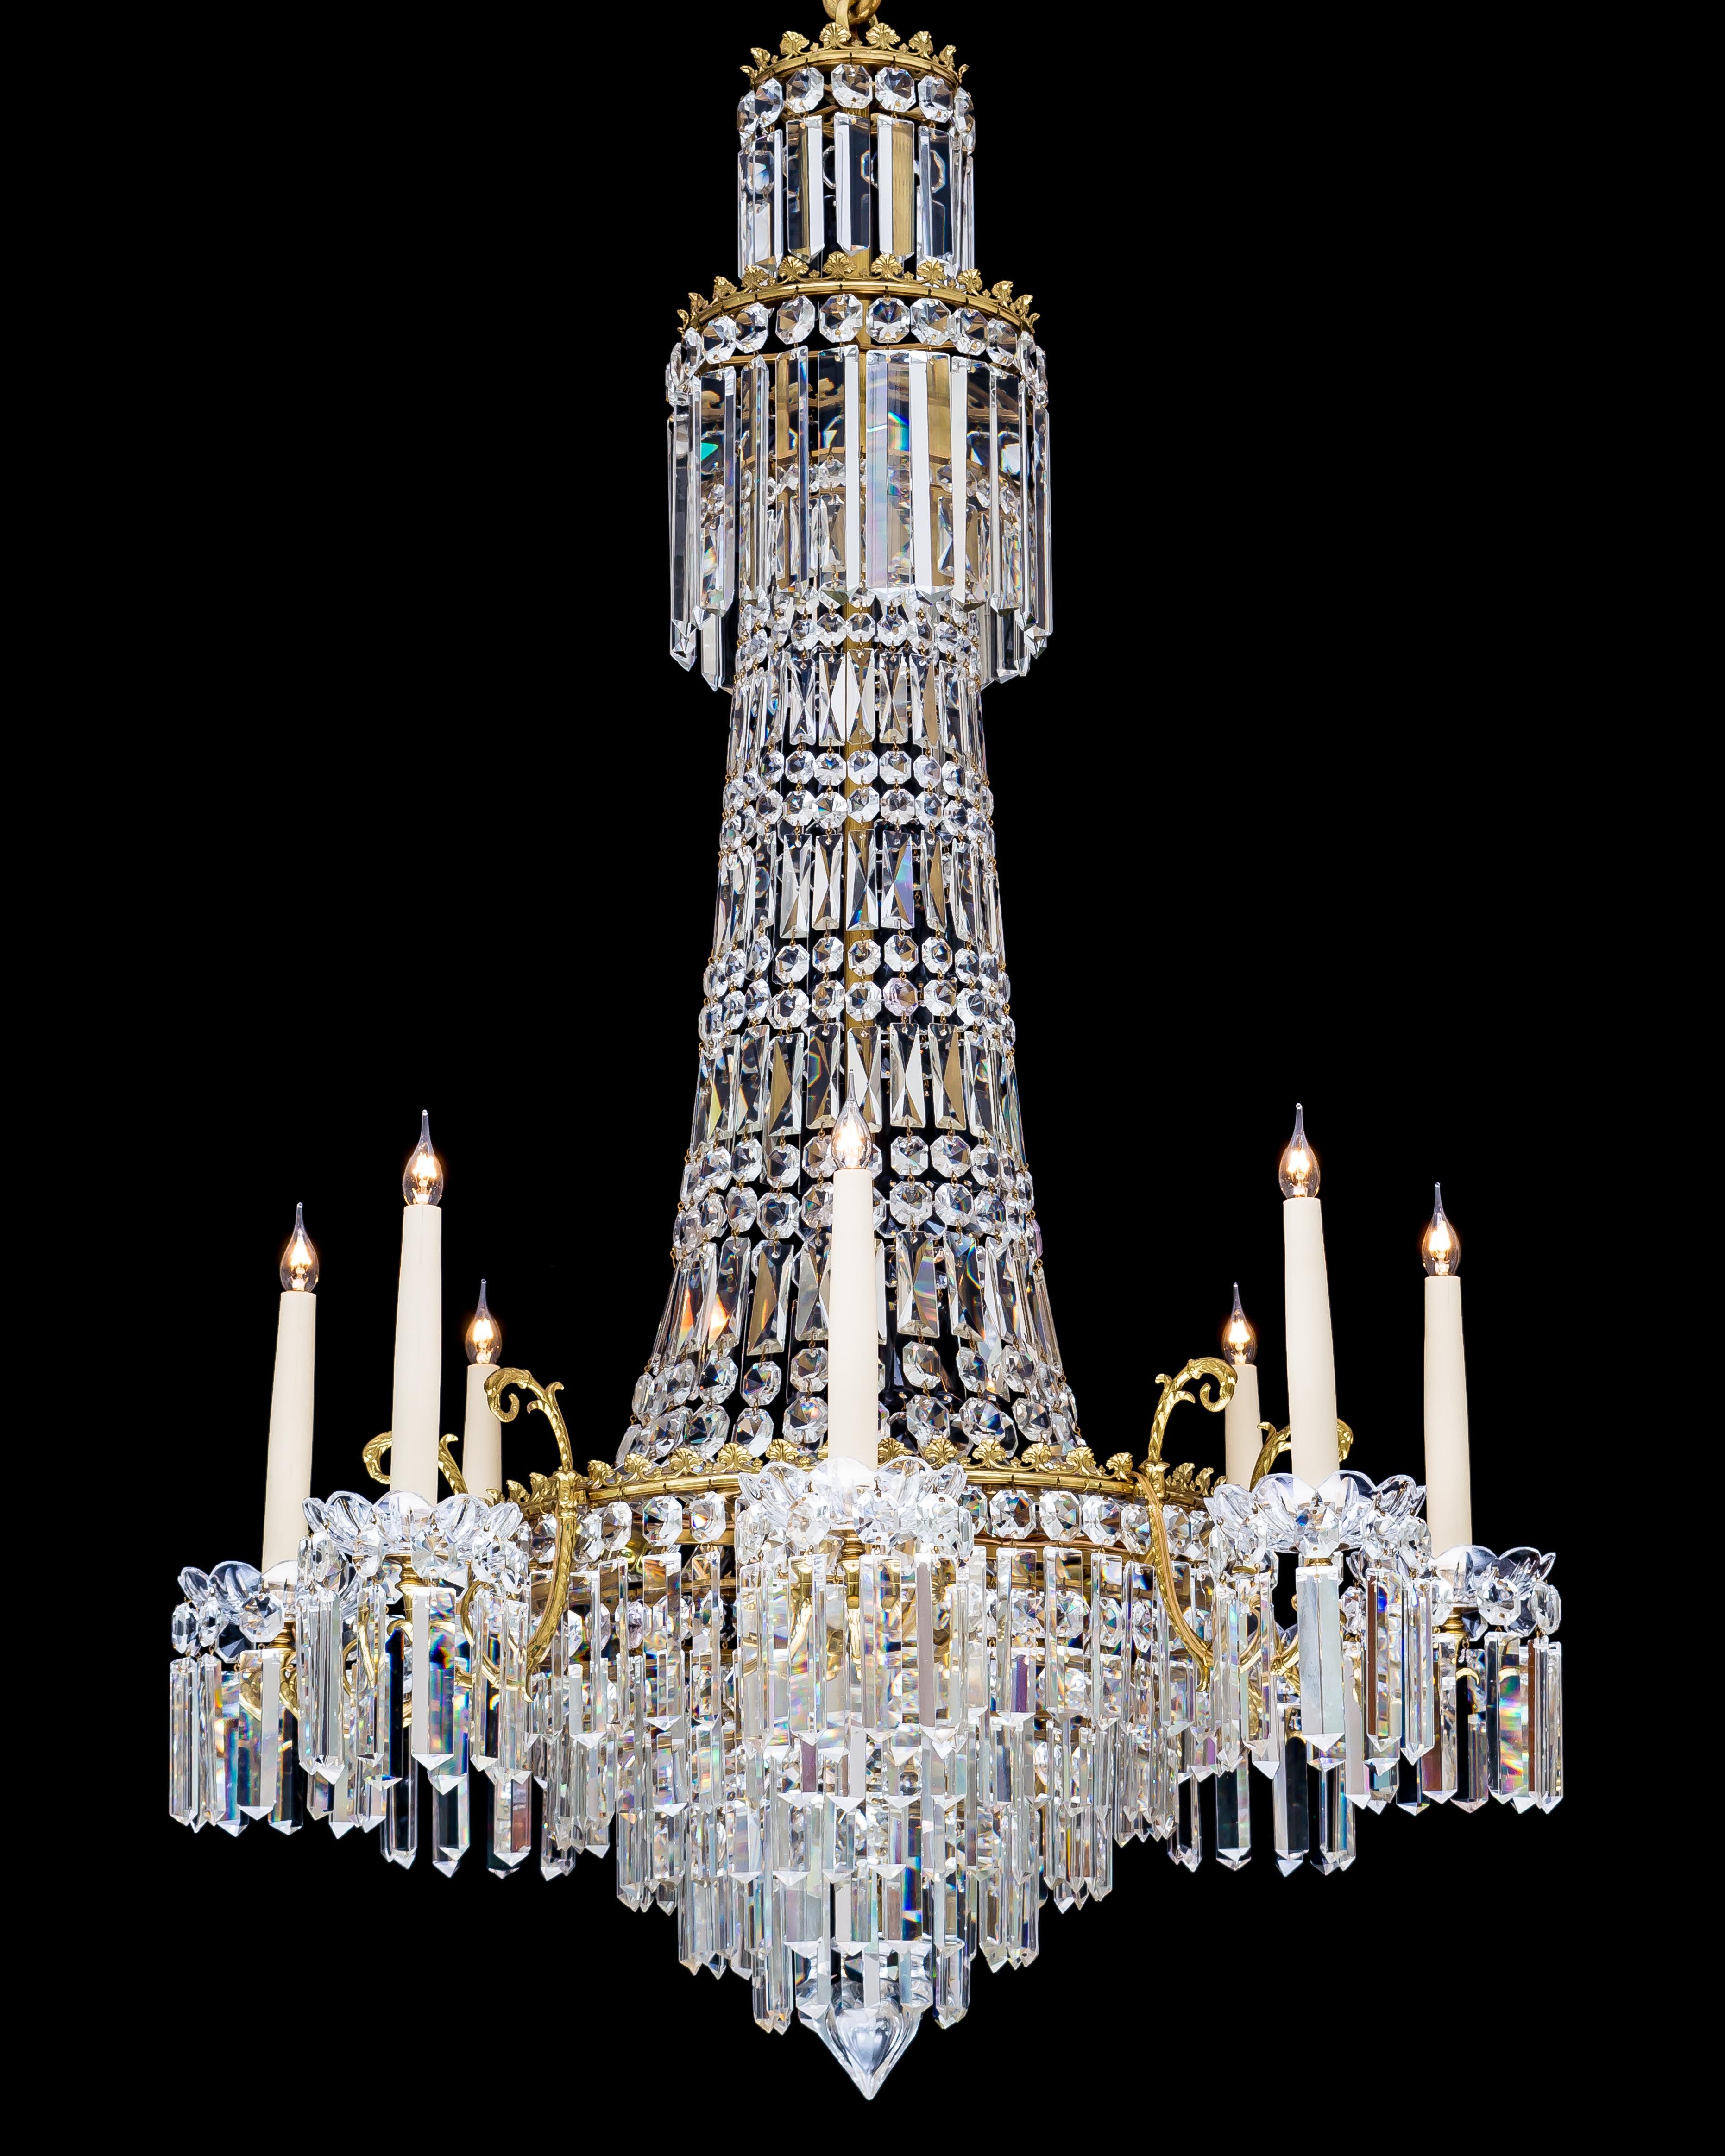 A eight-light cut glass and gilt mounted chandelier of classic tent and waterfall design the stem consisting of two drop hung rings with decorative banding and a tent of drops cascading to the main ring, the main ring supporting eight candle arms